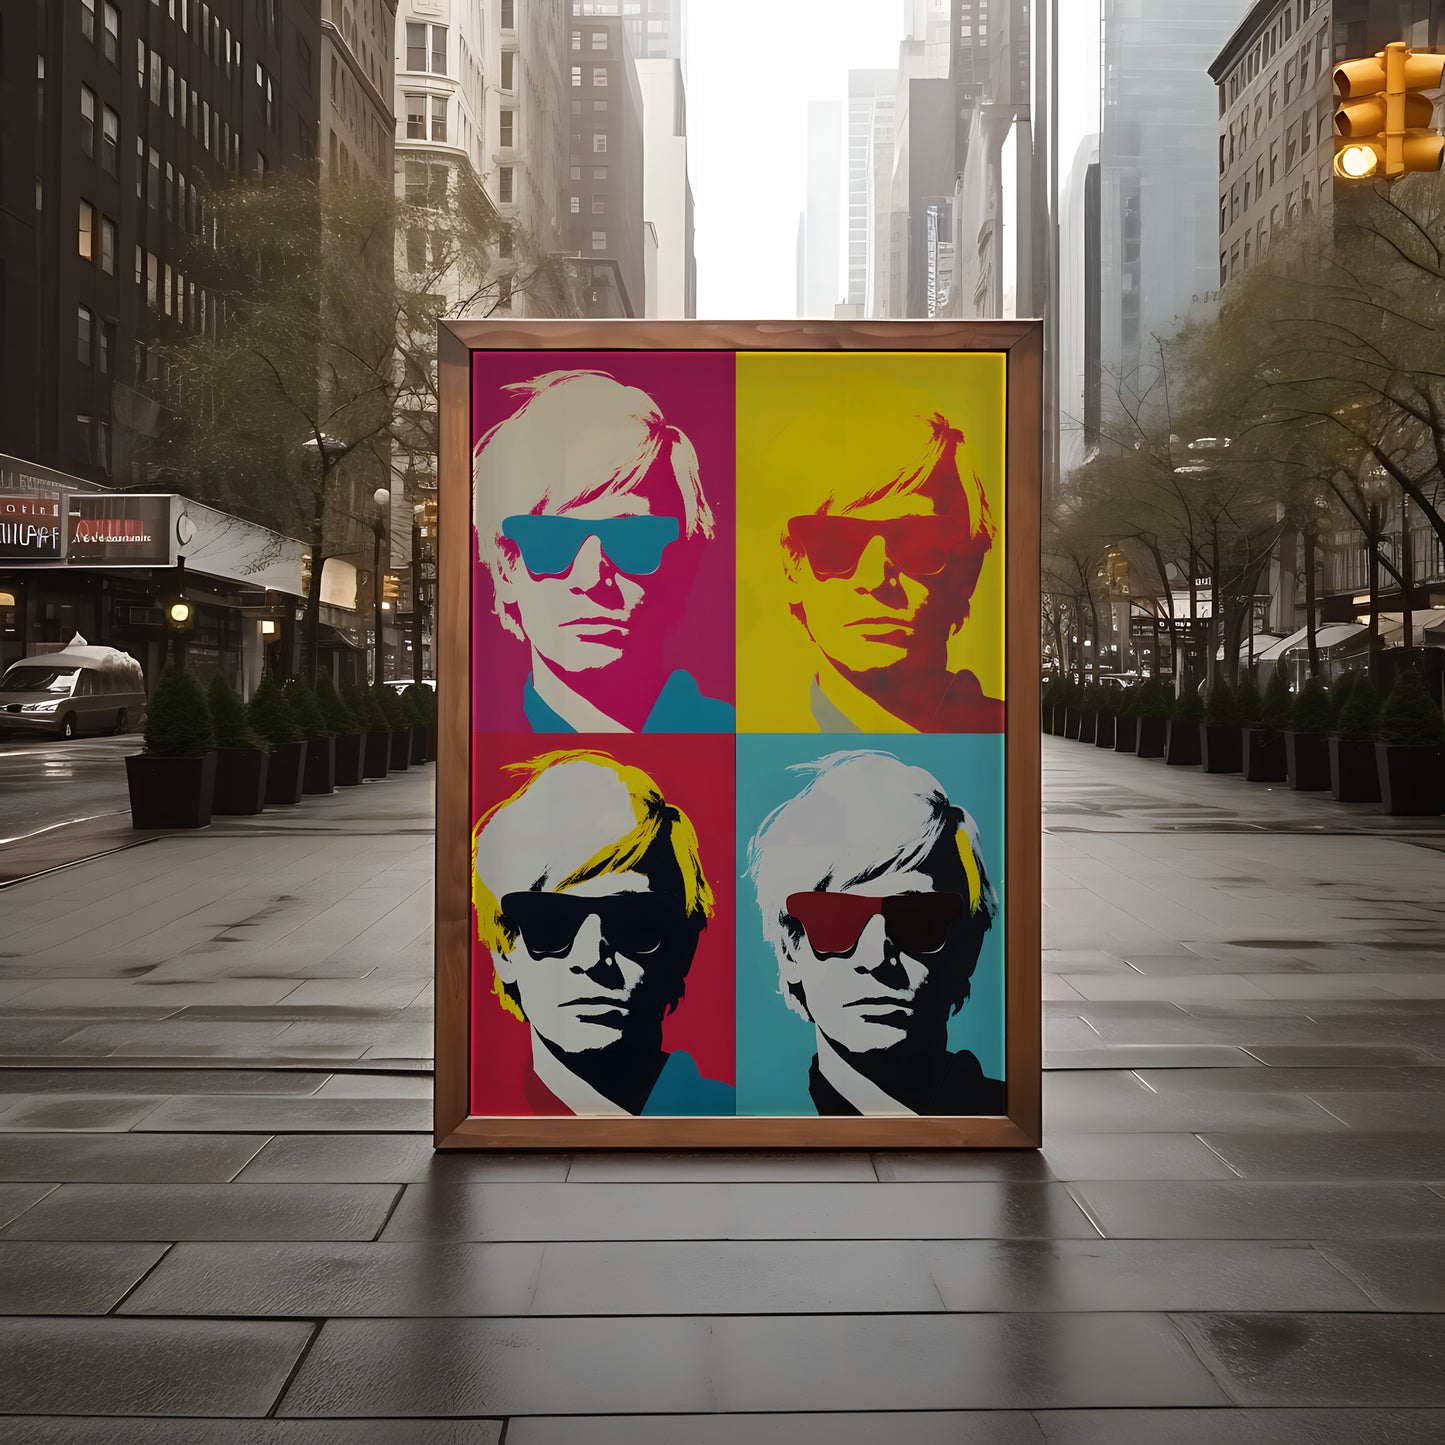 A colorful pop art-style portrait of Andy Warhol displayed on a city street.